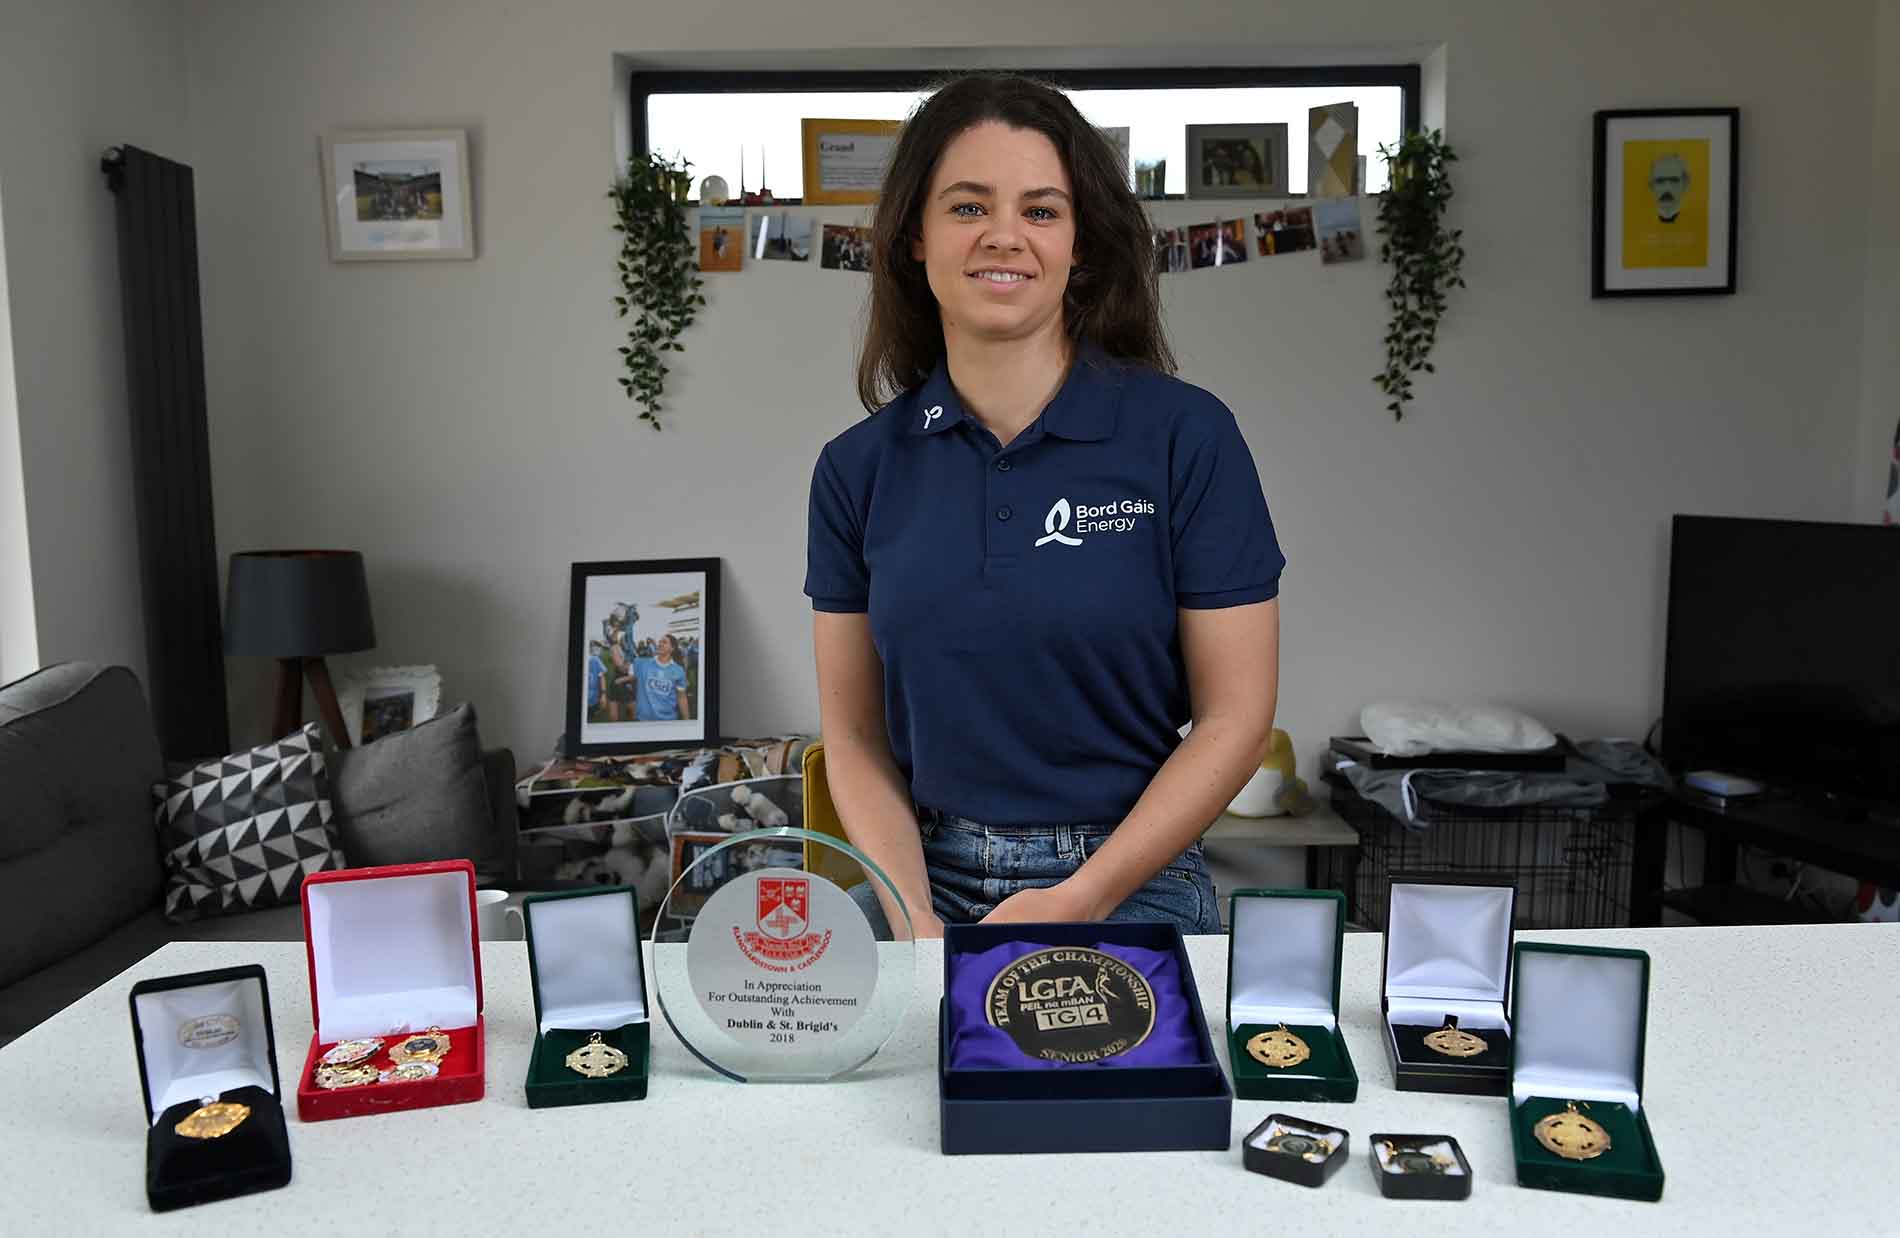 A photo of Noelle Healy with her awards.